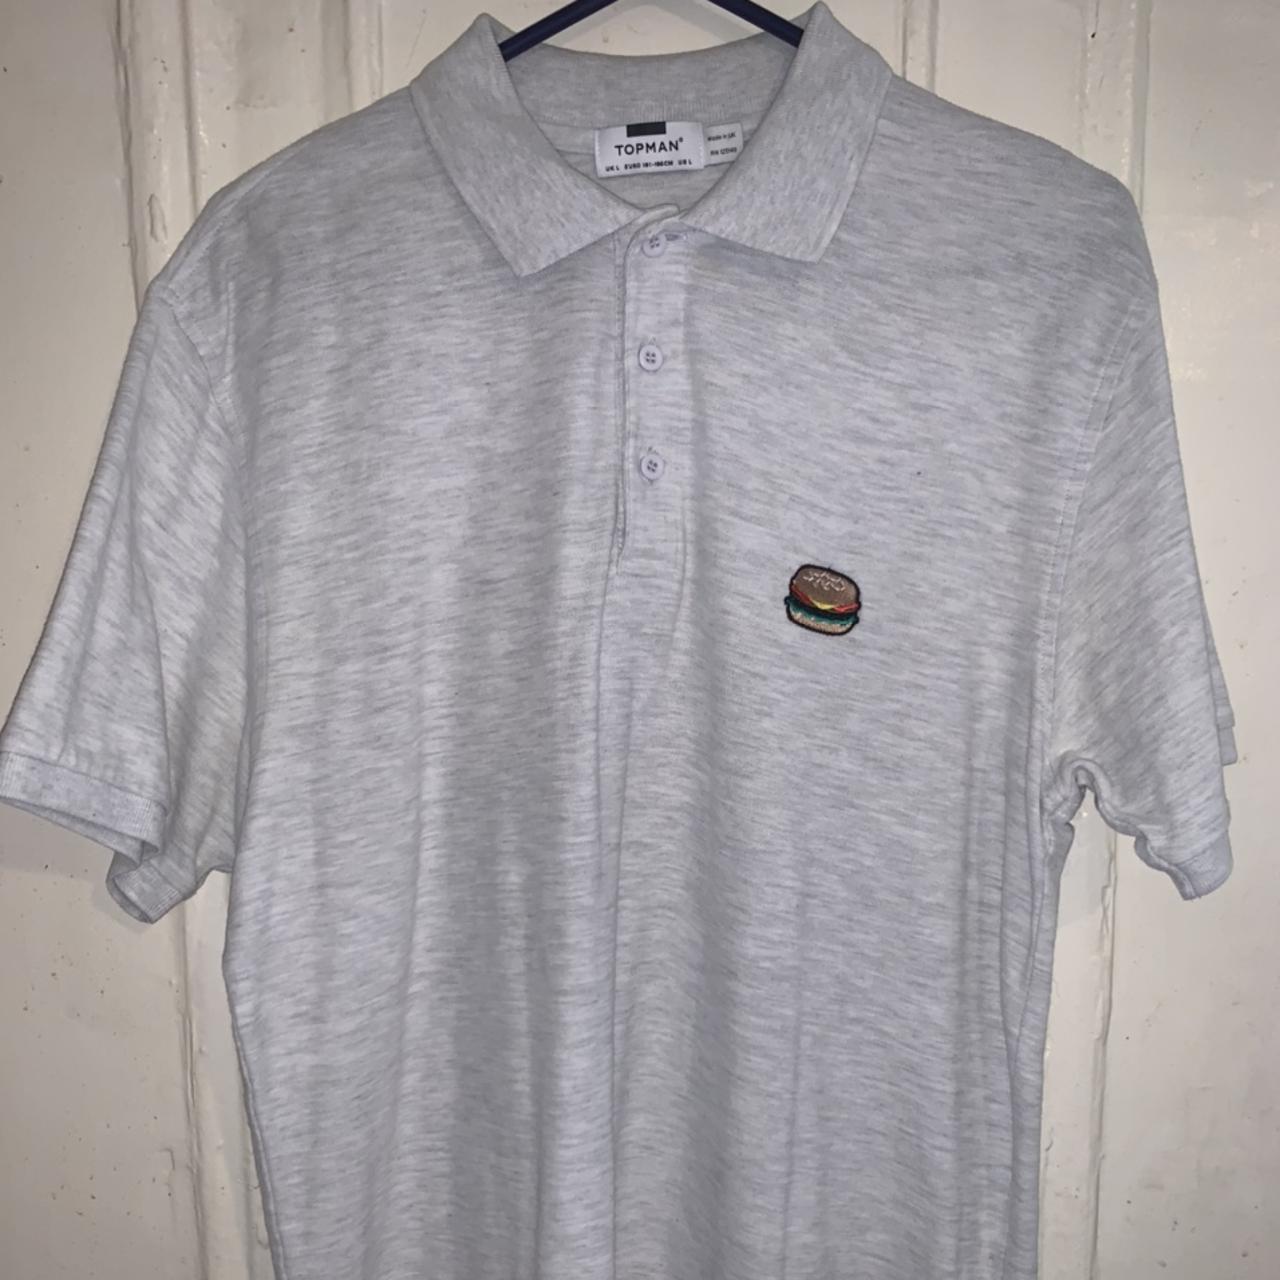 Heather Grey polo shirt from TOPMAN with embroidery... - Depop